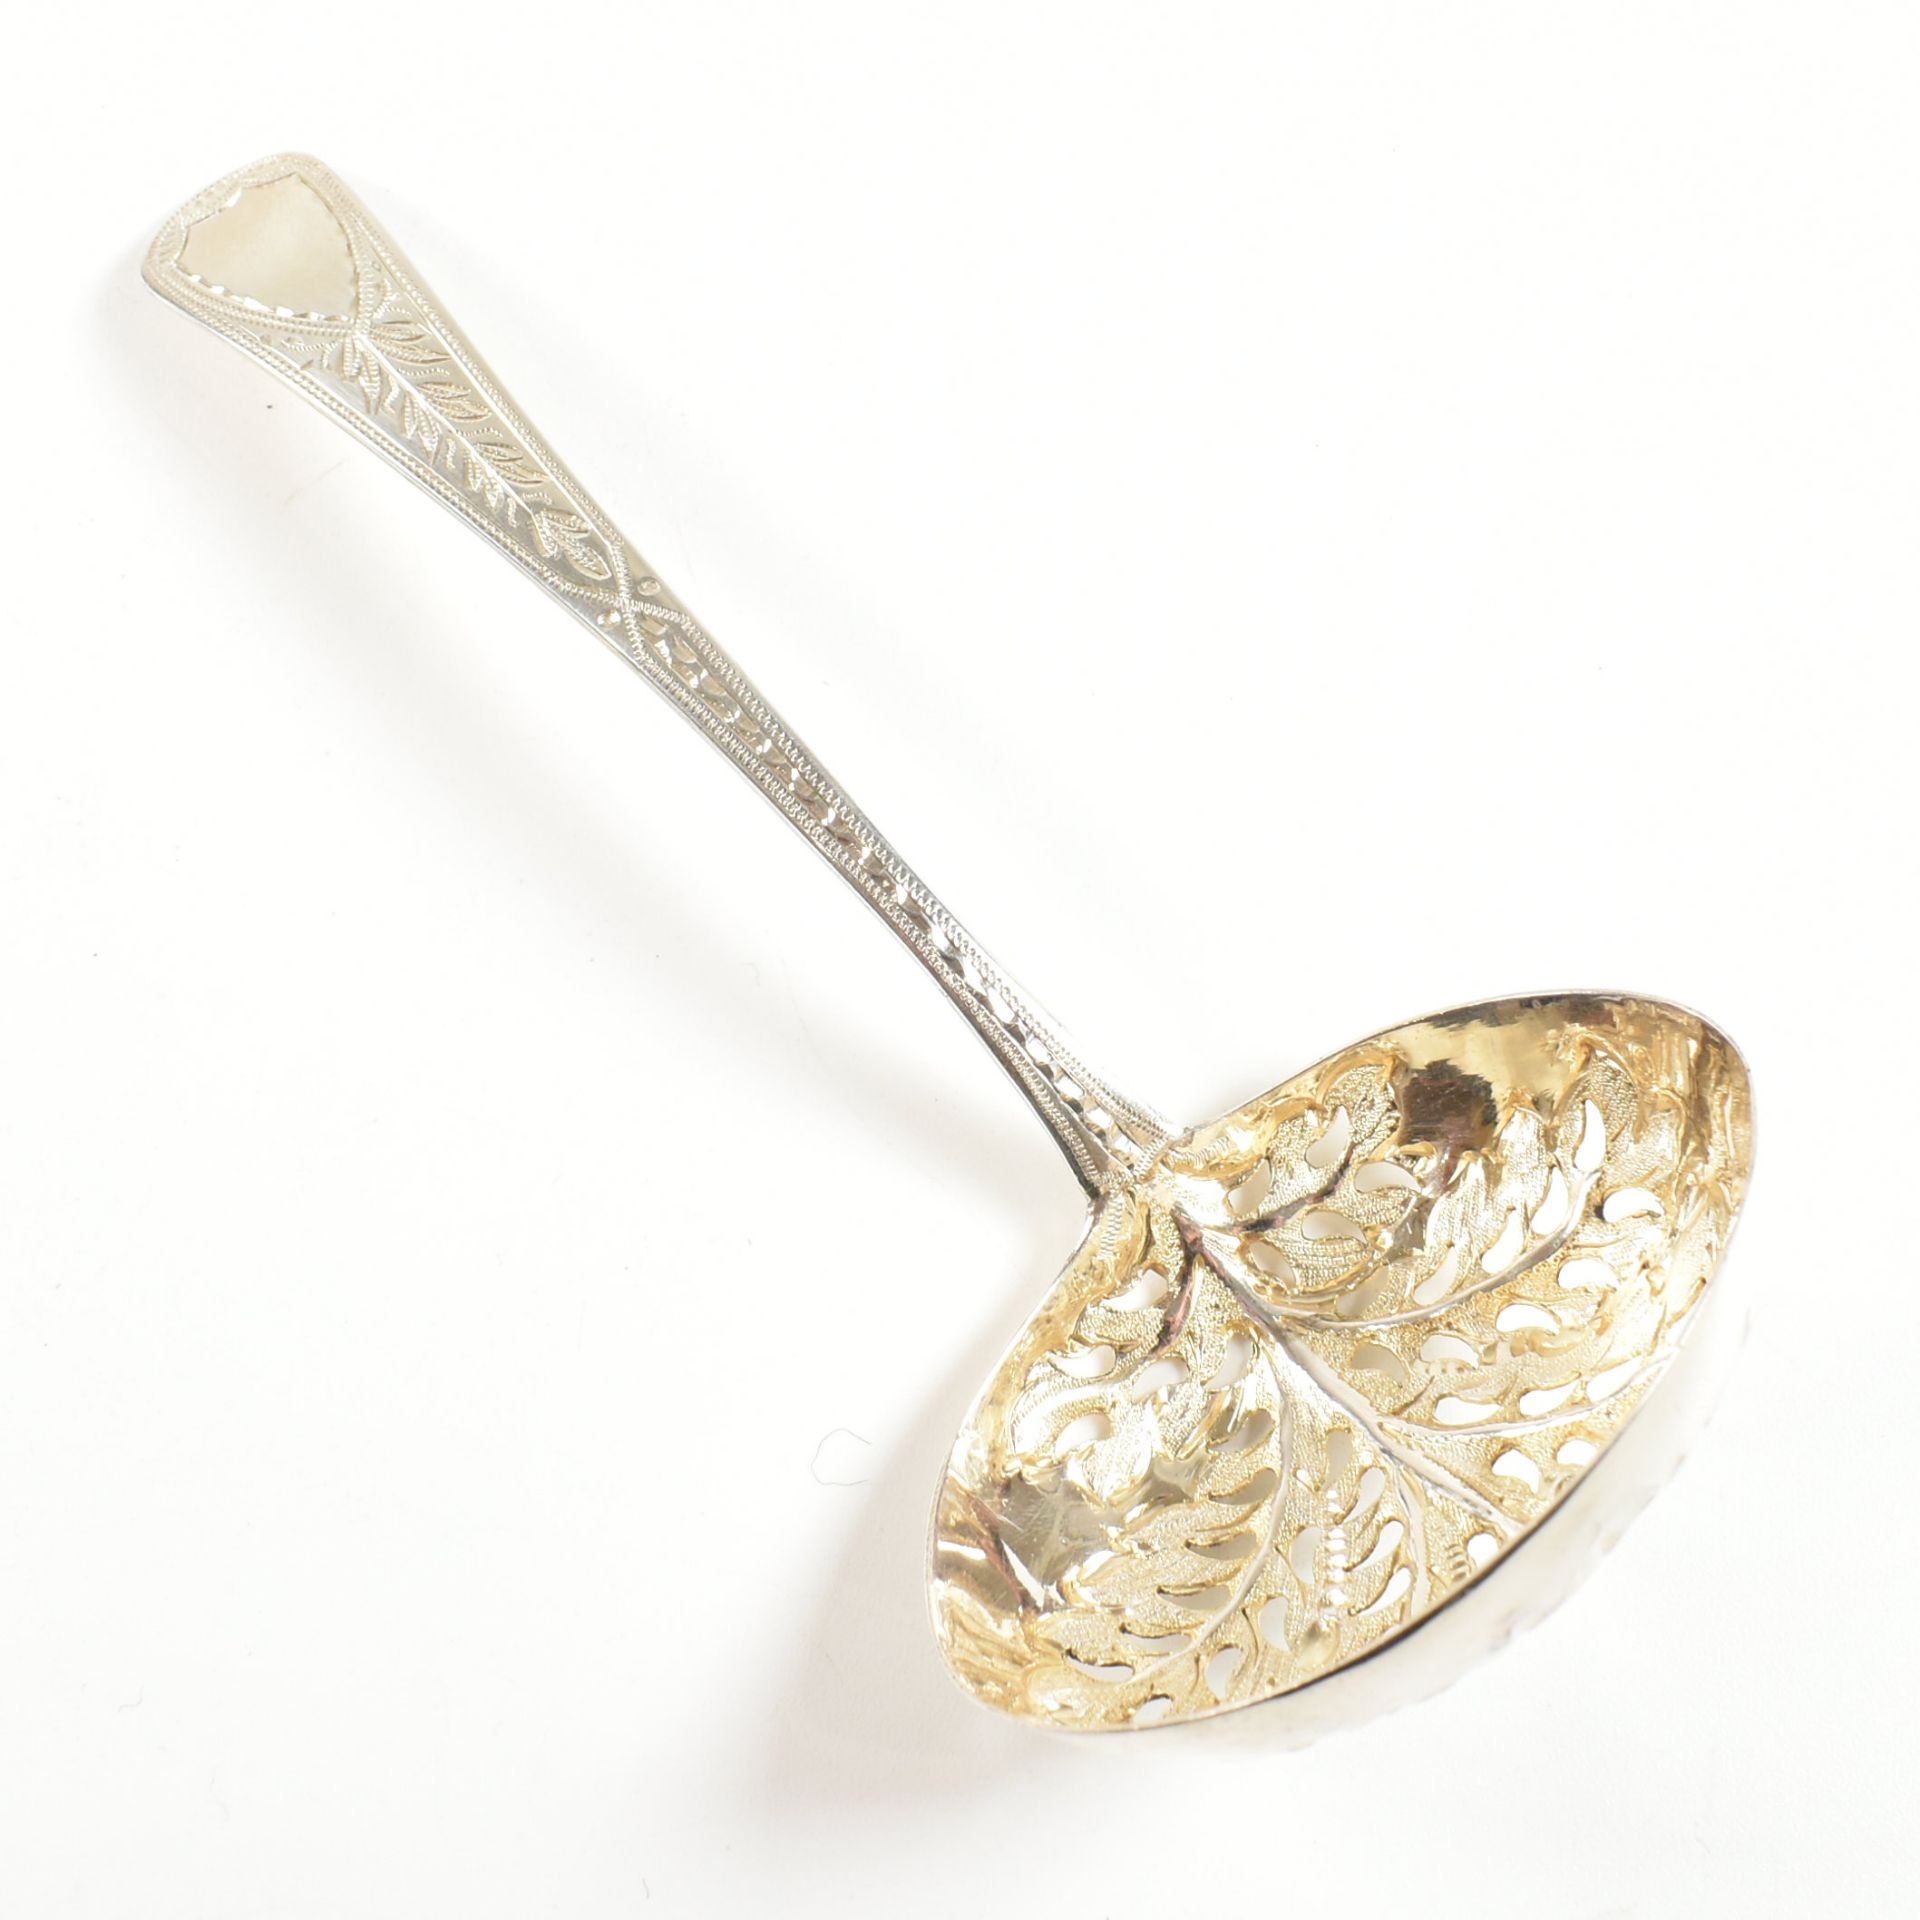 CASED GEORGE II HALLMARKED SILVER SUGAR SIFTER SPOON - Image 11 of 12